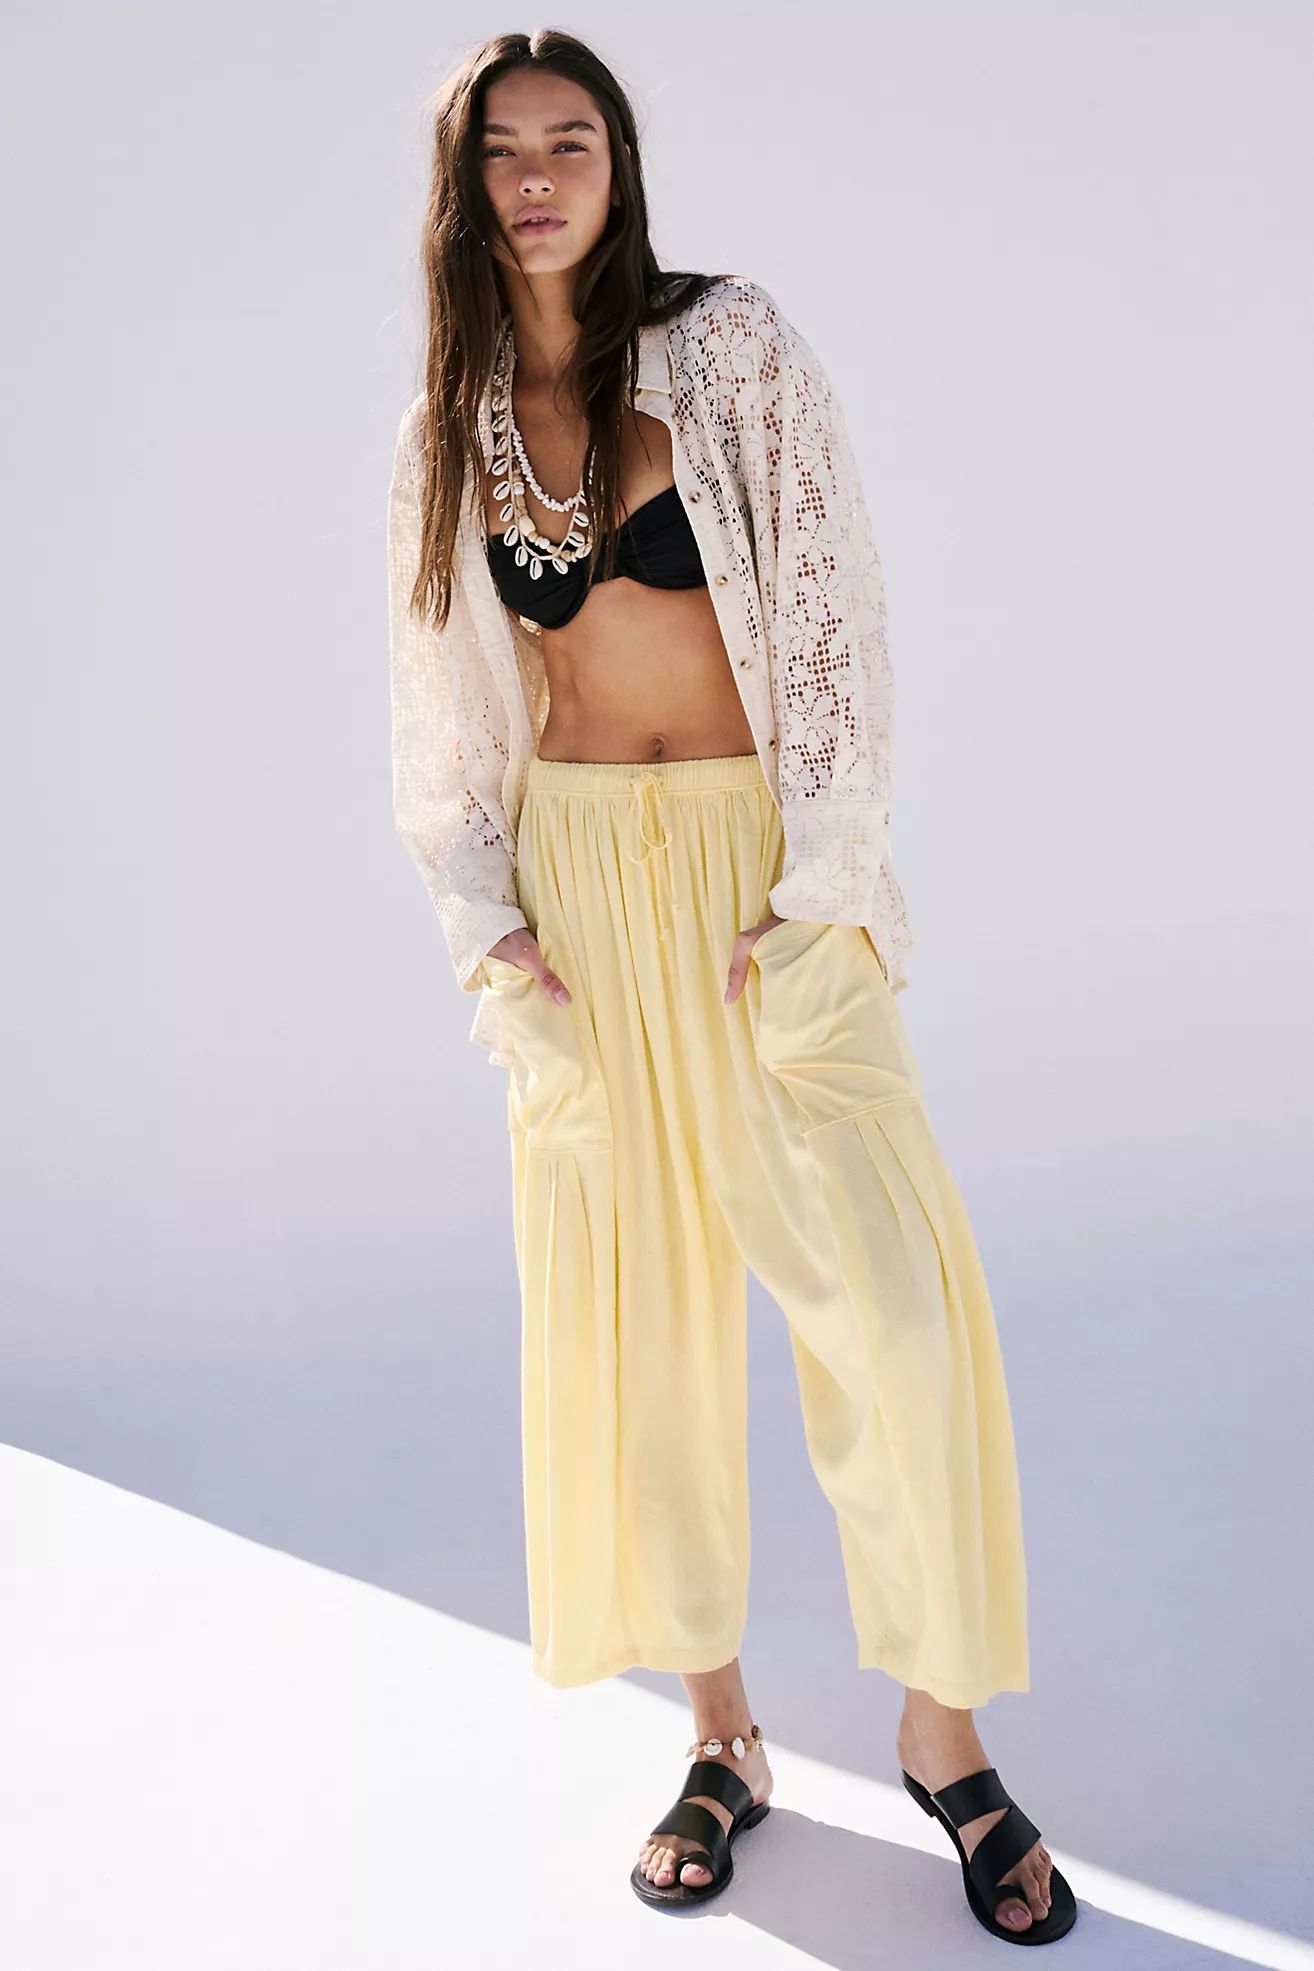 Free People Style Summer Outfits | Free People (Global - UK&FR Excluded)